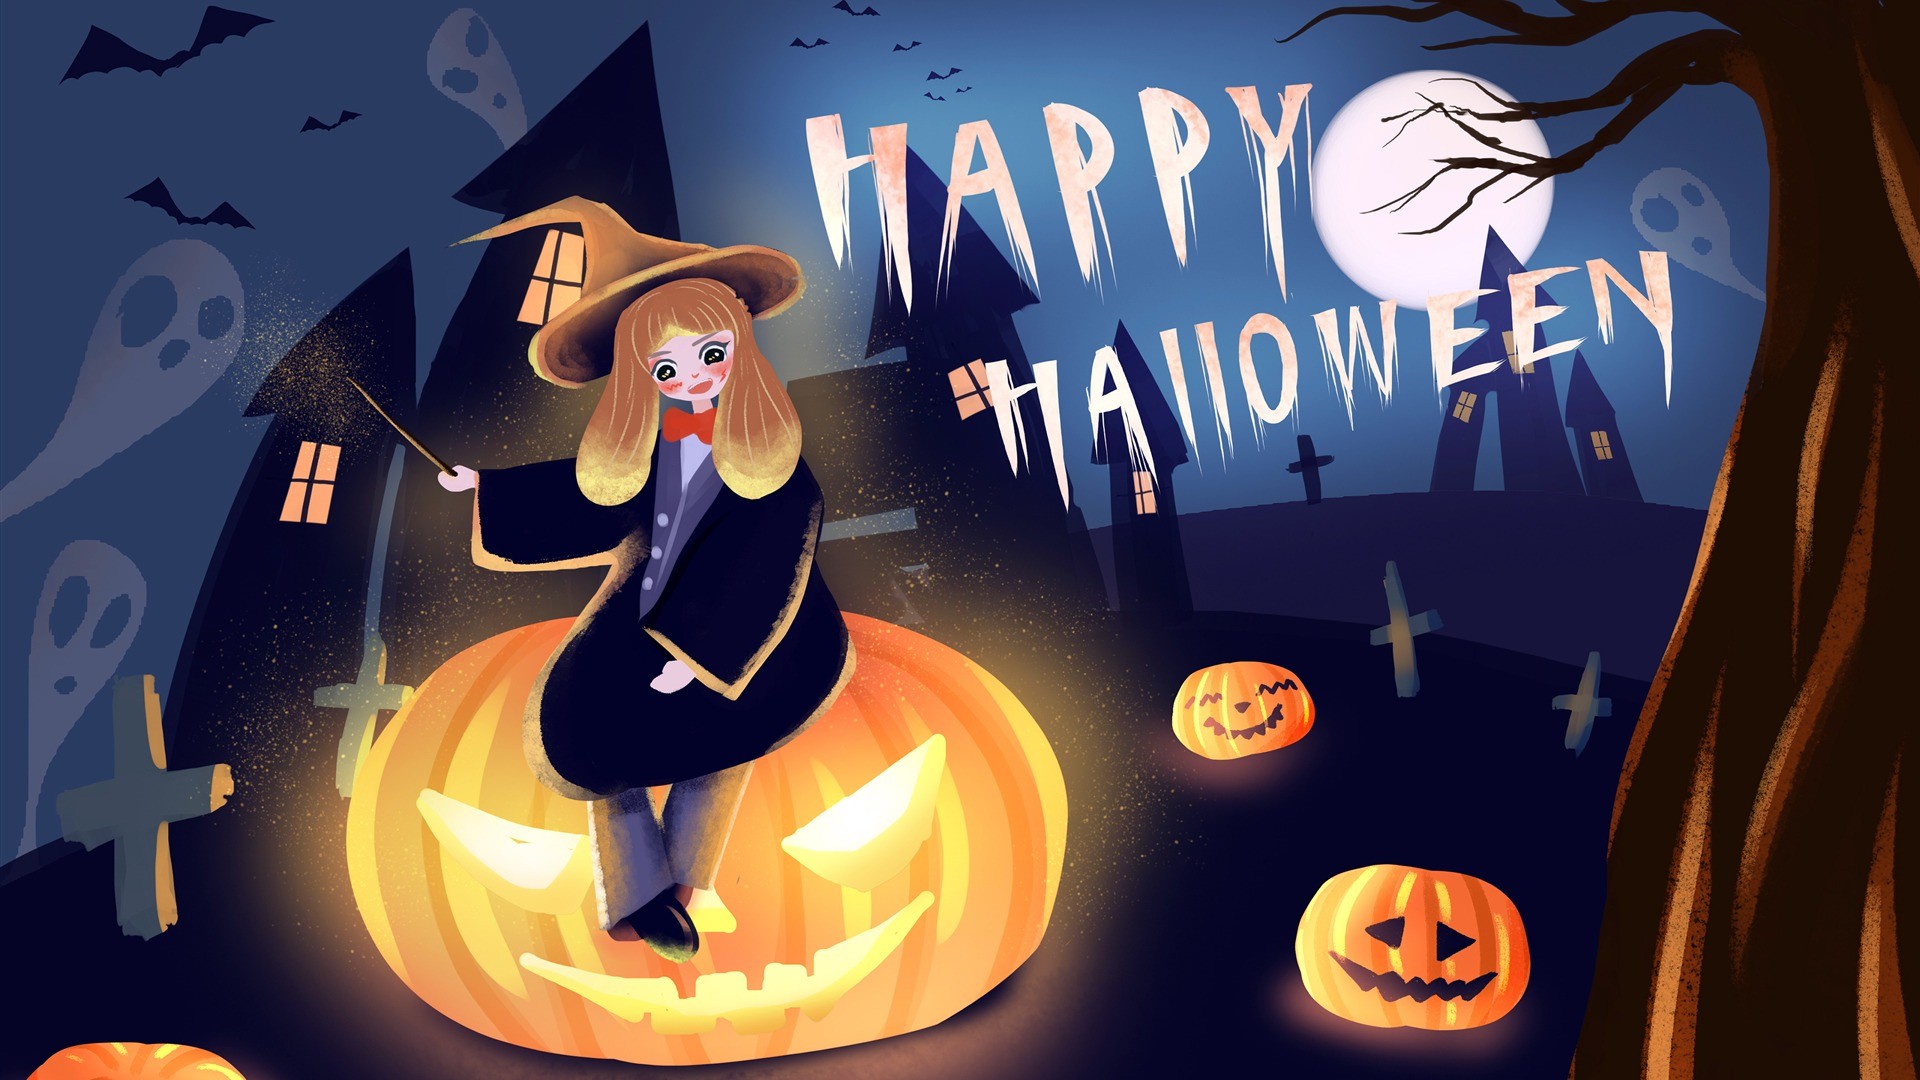 Hallloween Witch free picture